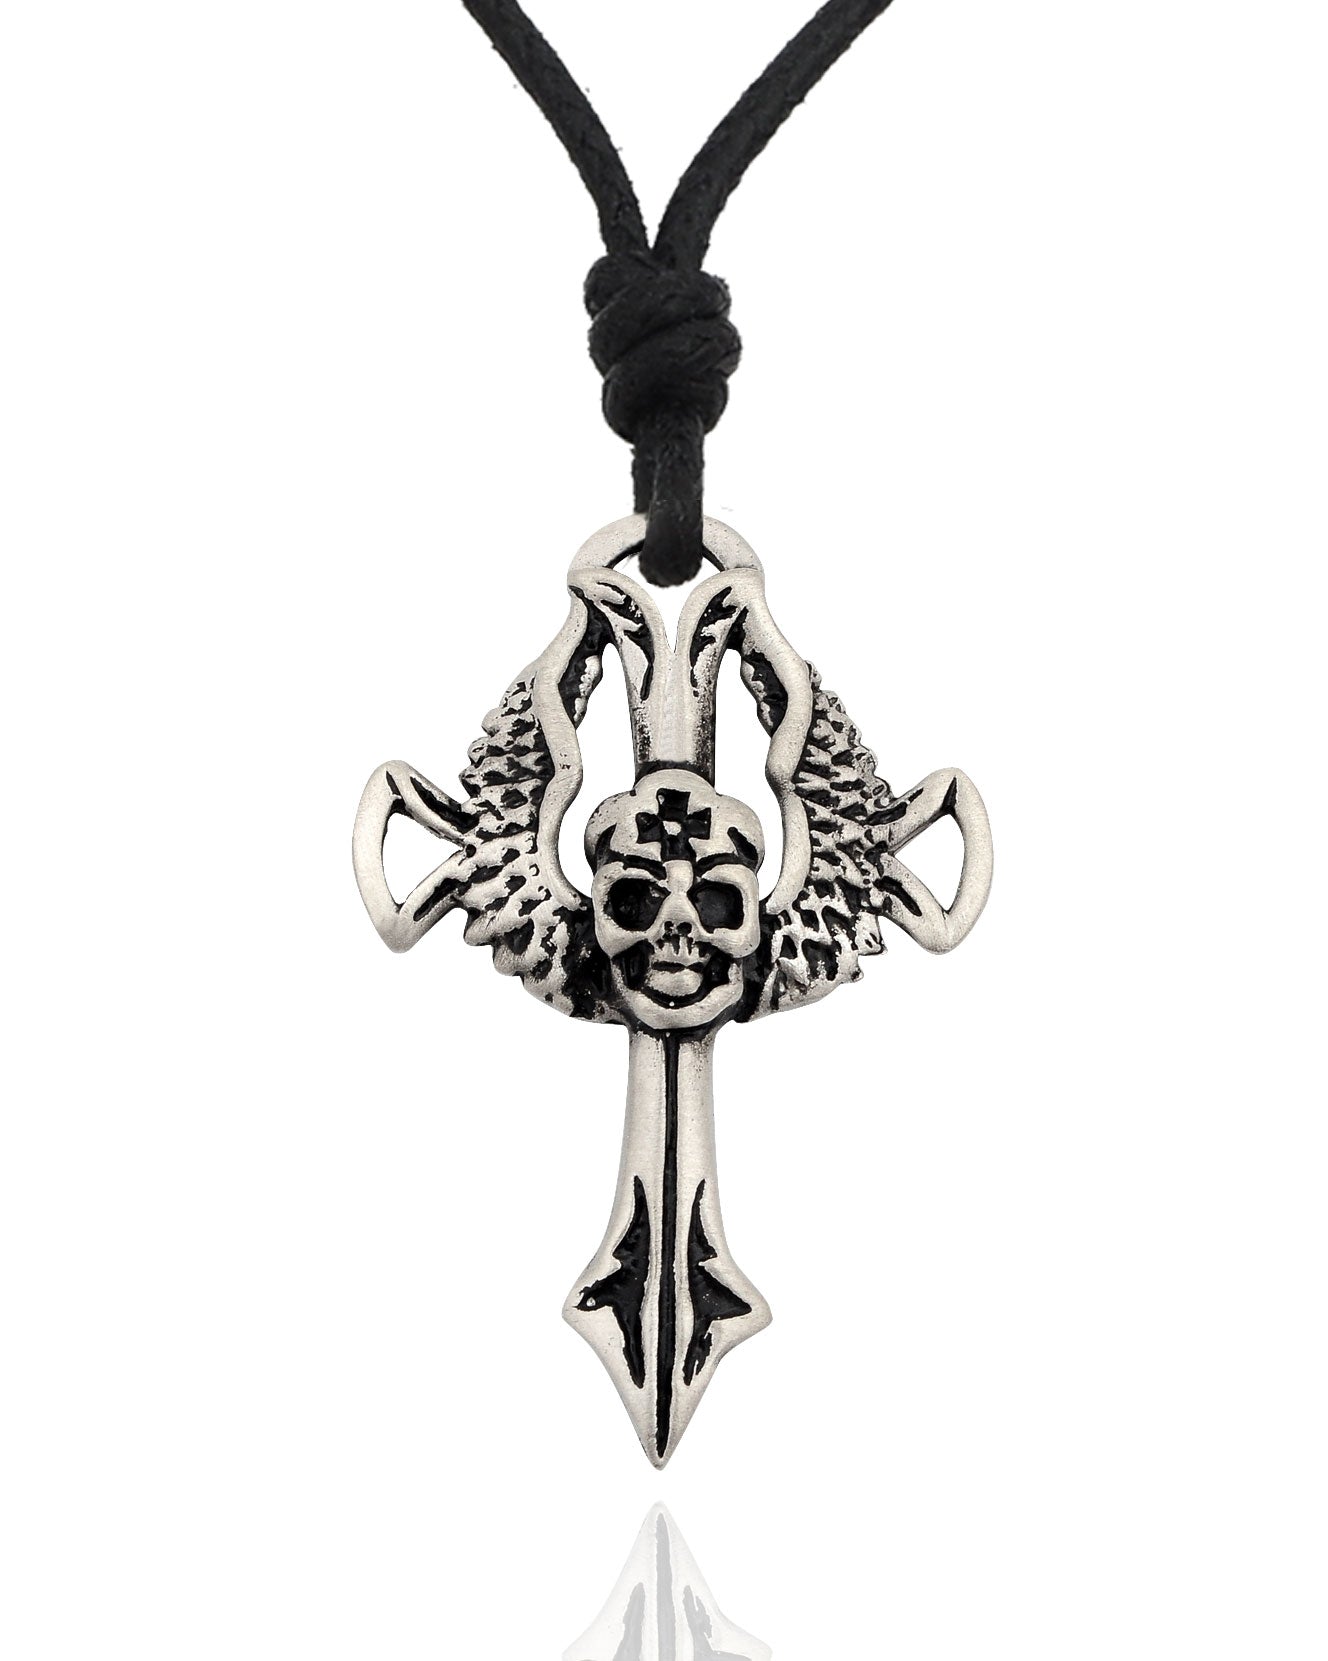 Skull &Wings Sword Silver Pewter Charm Necklace Pendant Jewelry